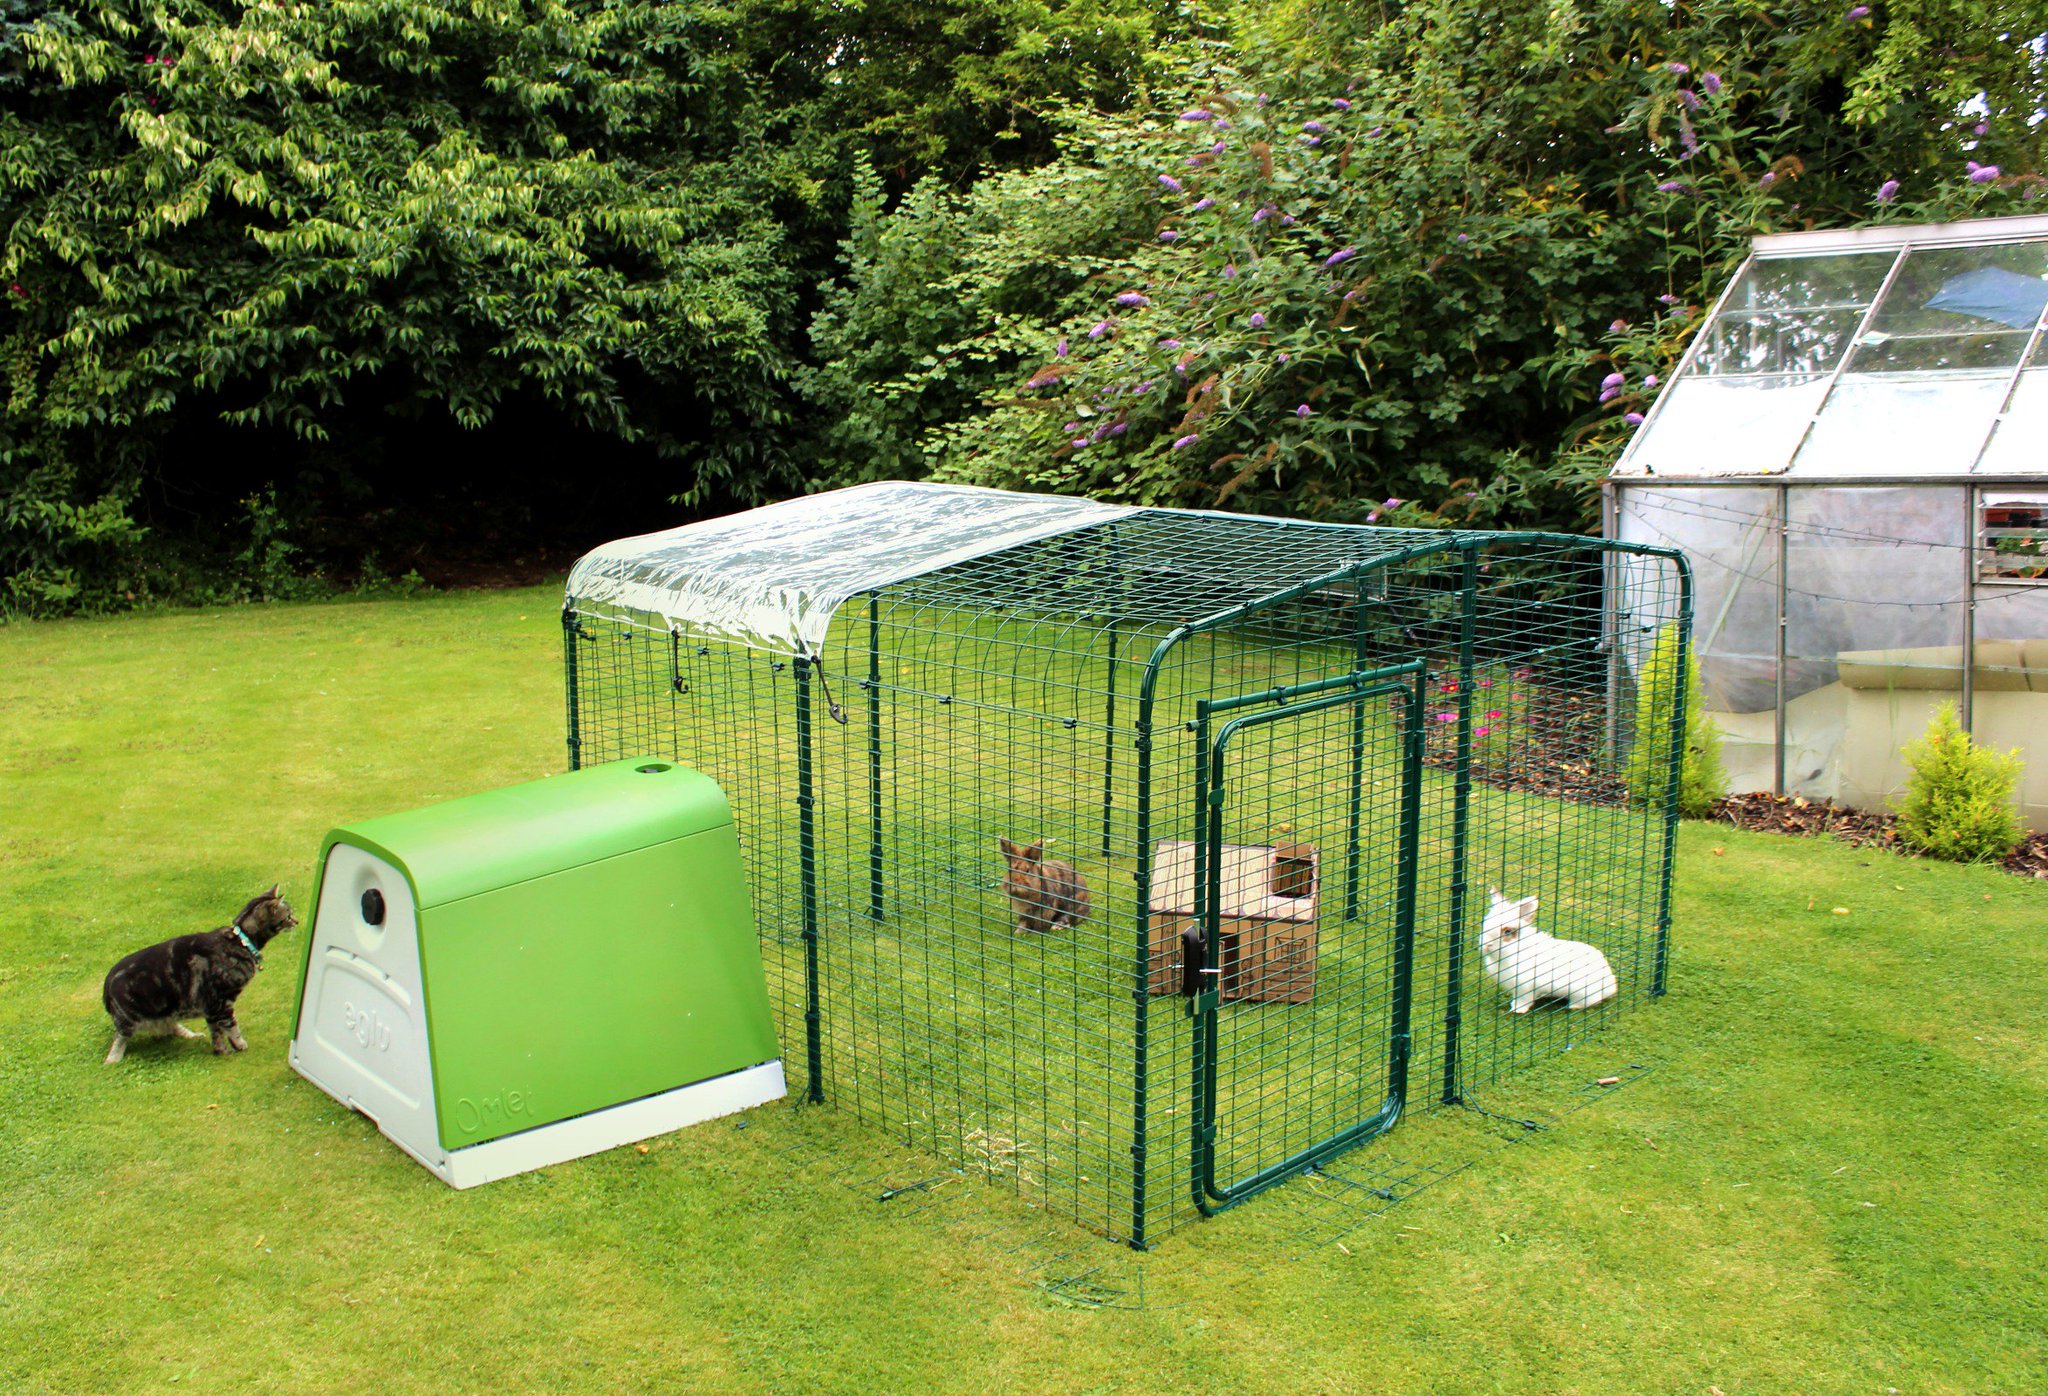 Omlet Uk On Twitter Give Your Pets More Space To Roam Around Your Garden In Safety With Our Outdoor Pet Runs Now With 20 Off In The Omlet Christmas Sale Perfect For Chickens Cats Rabbits And Guinea Pigs Urbanchickens Https T Co 8f4zz5lu2h